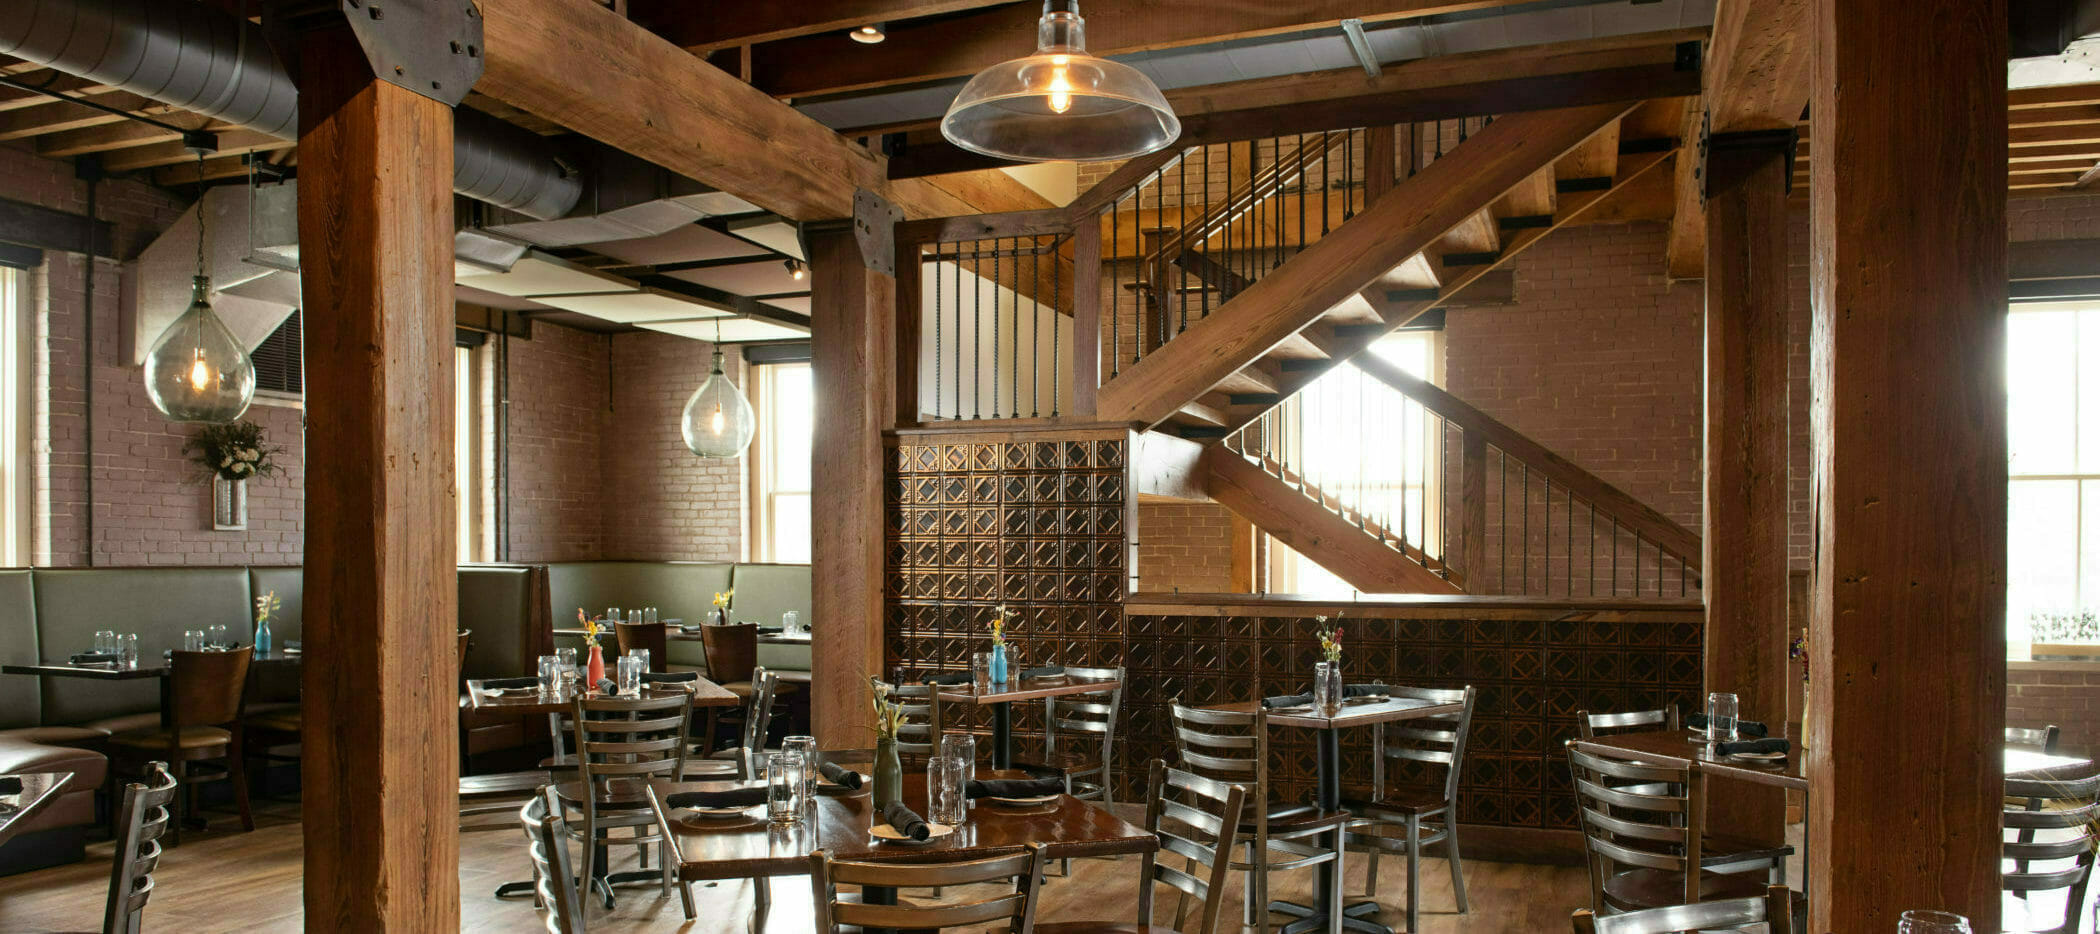 Main Dining Area at The Mill in Hershey